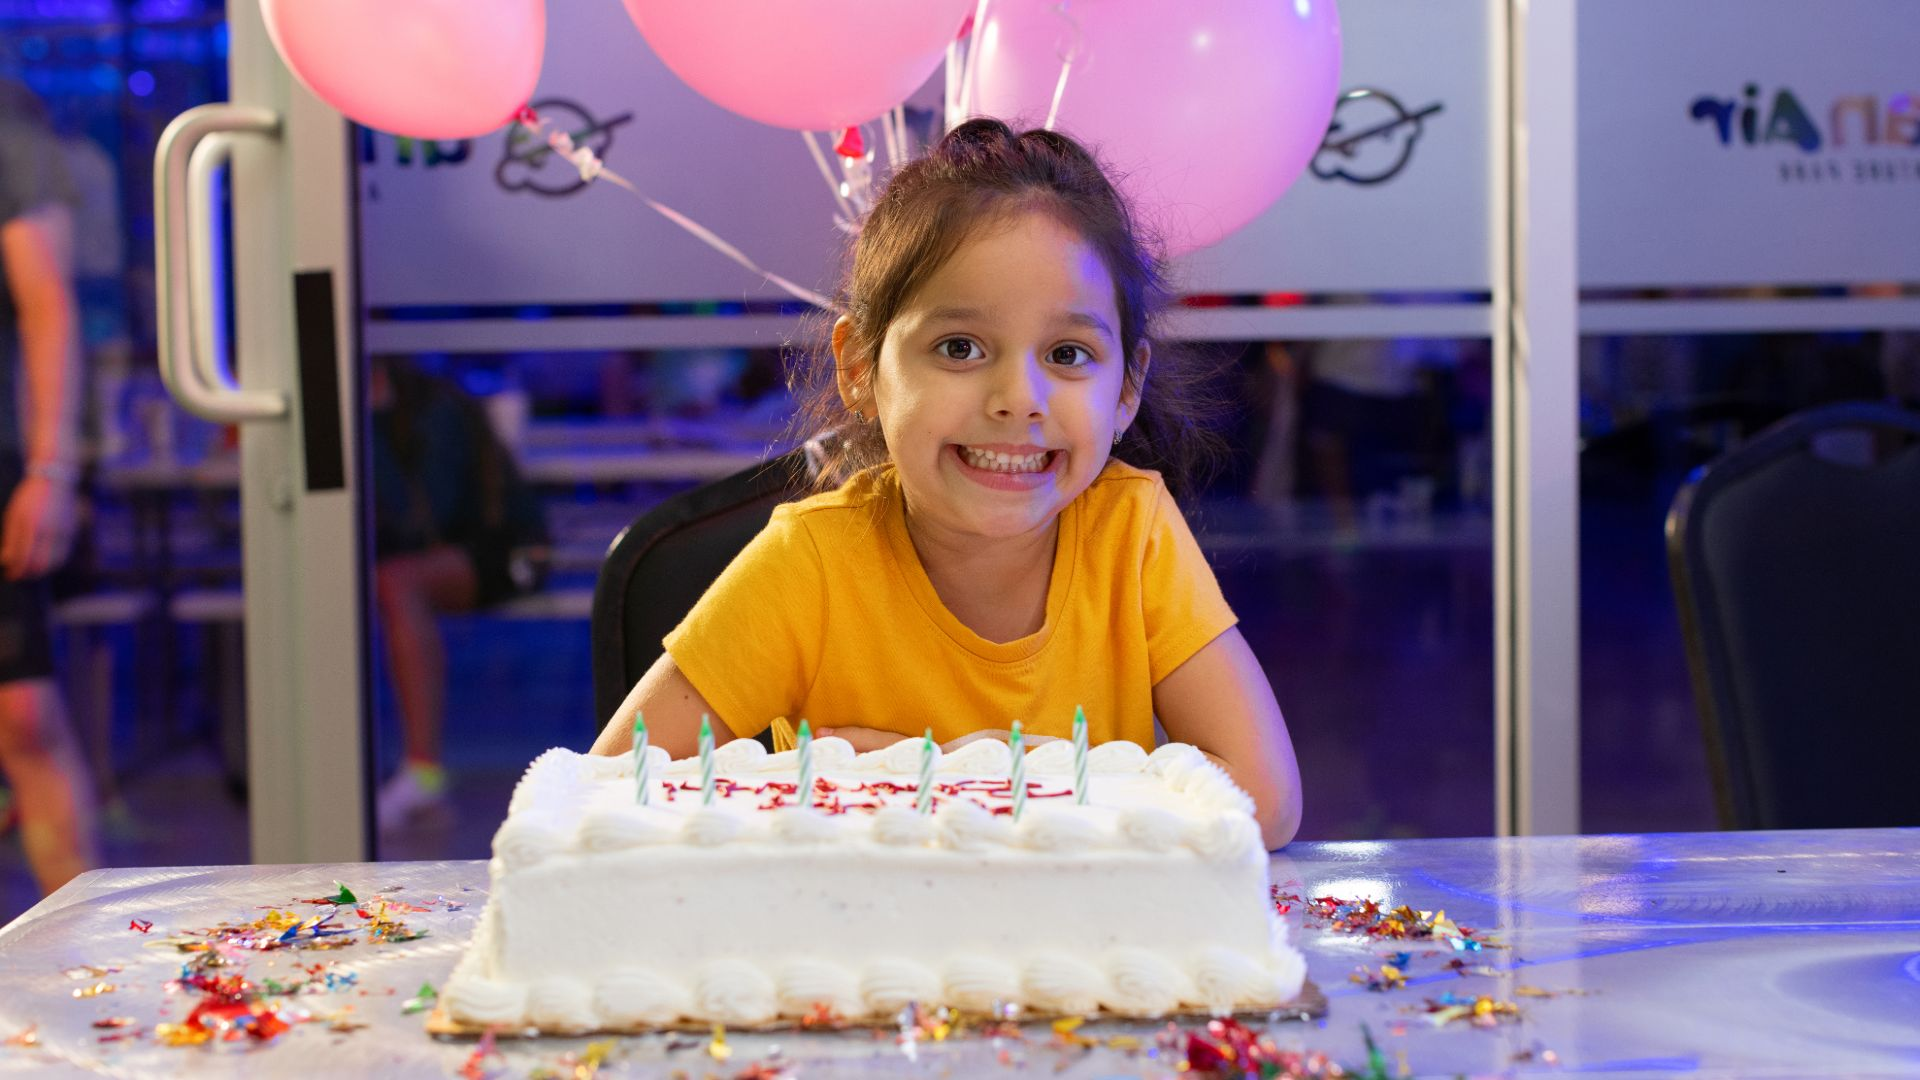 A young girl smiles in front of her Urban Air Birthday Cake